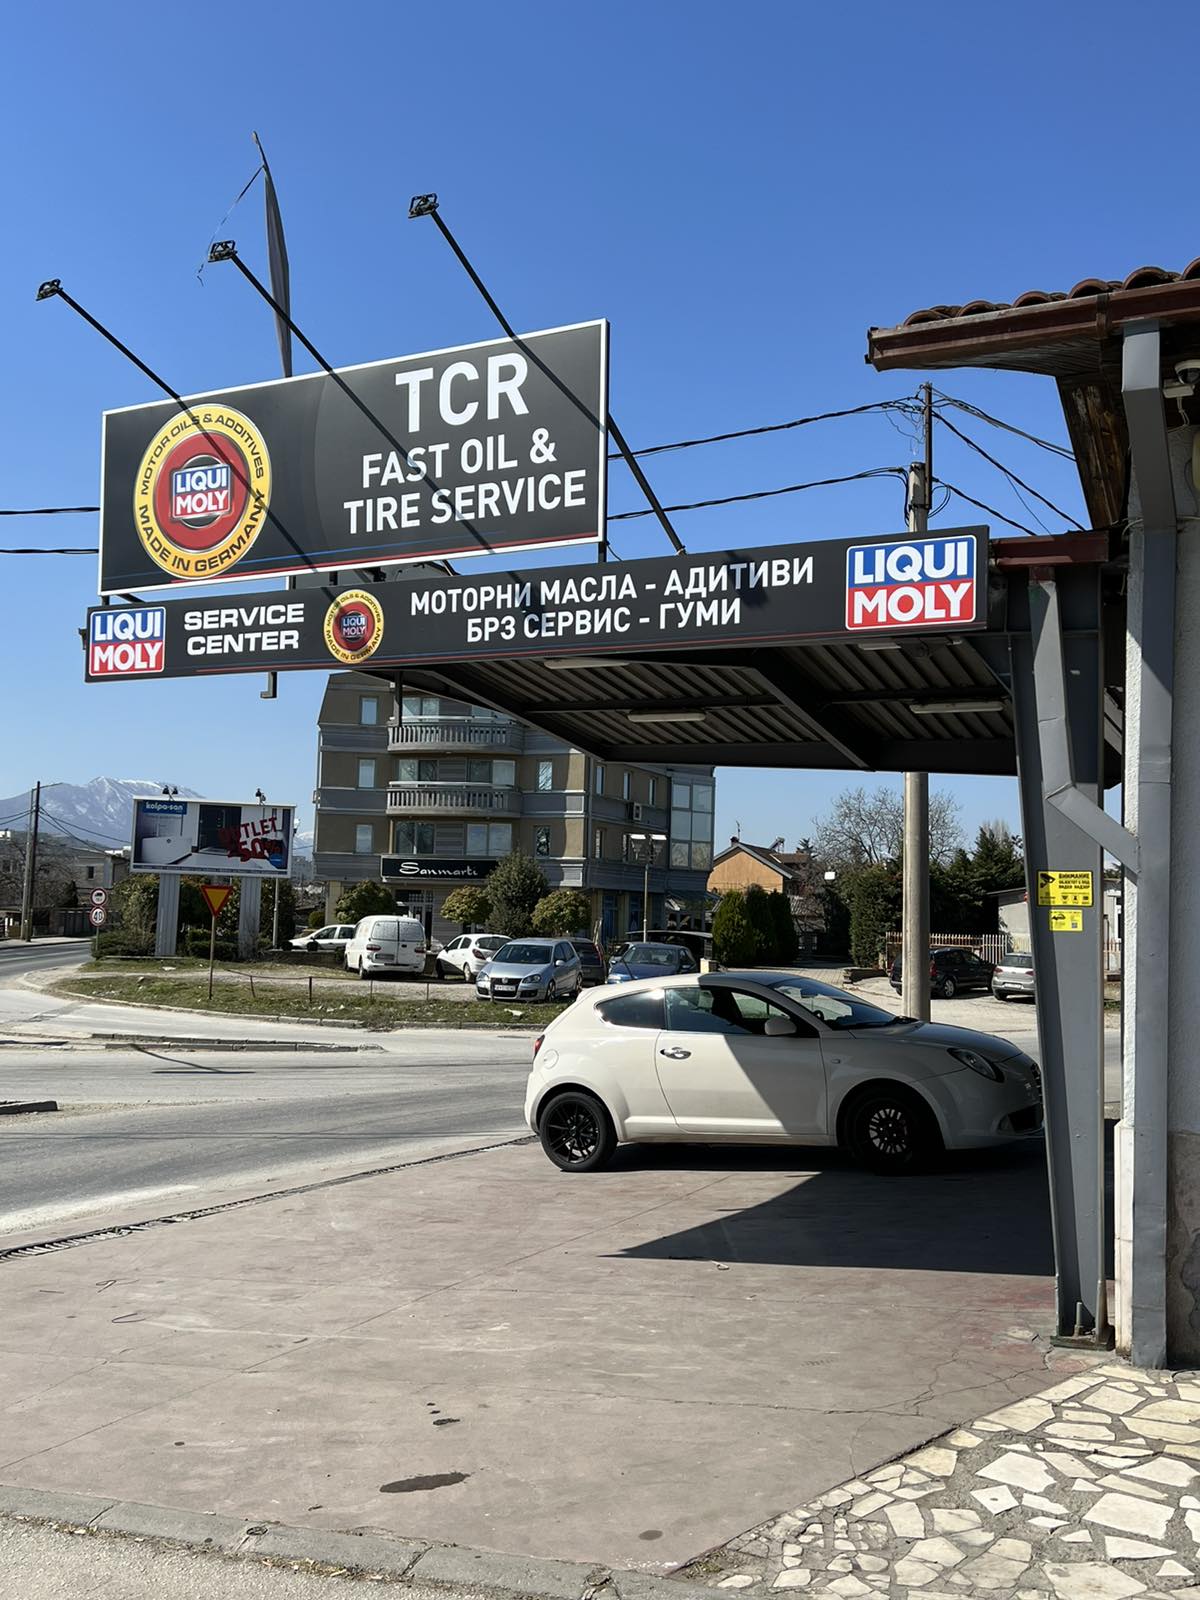 TCR Fast Oil & Tire Service